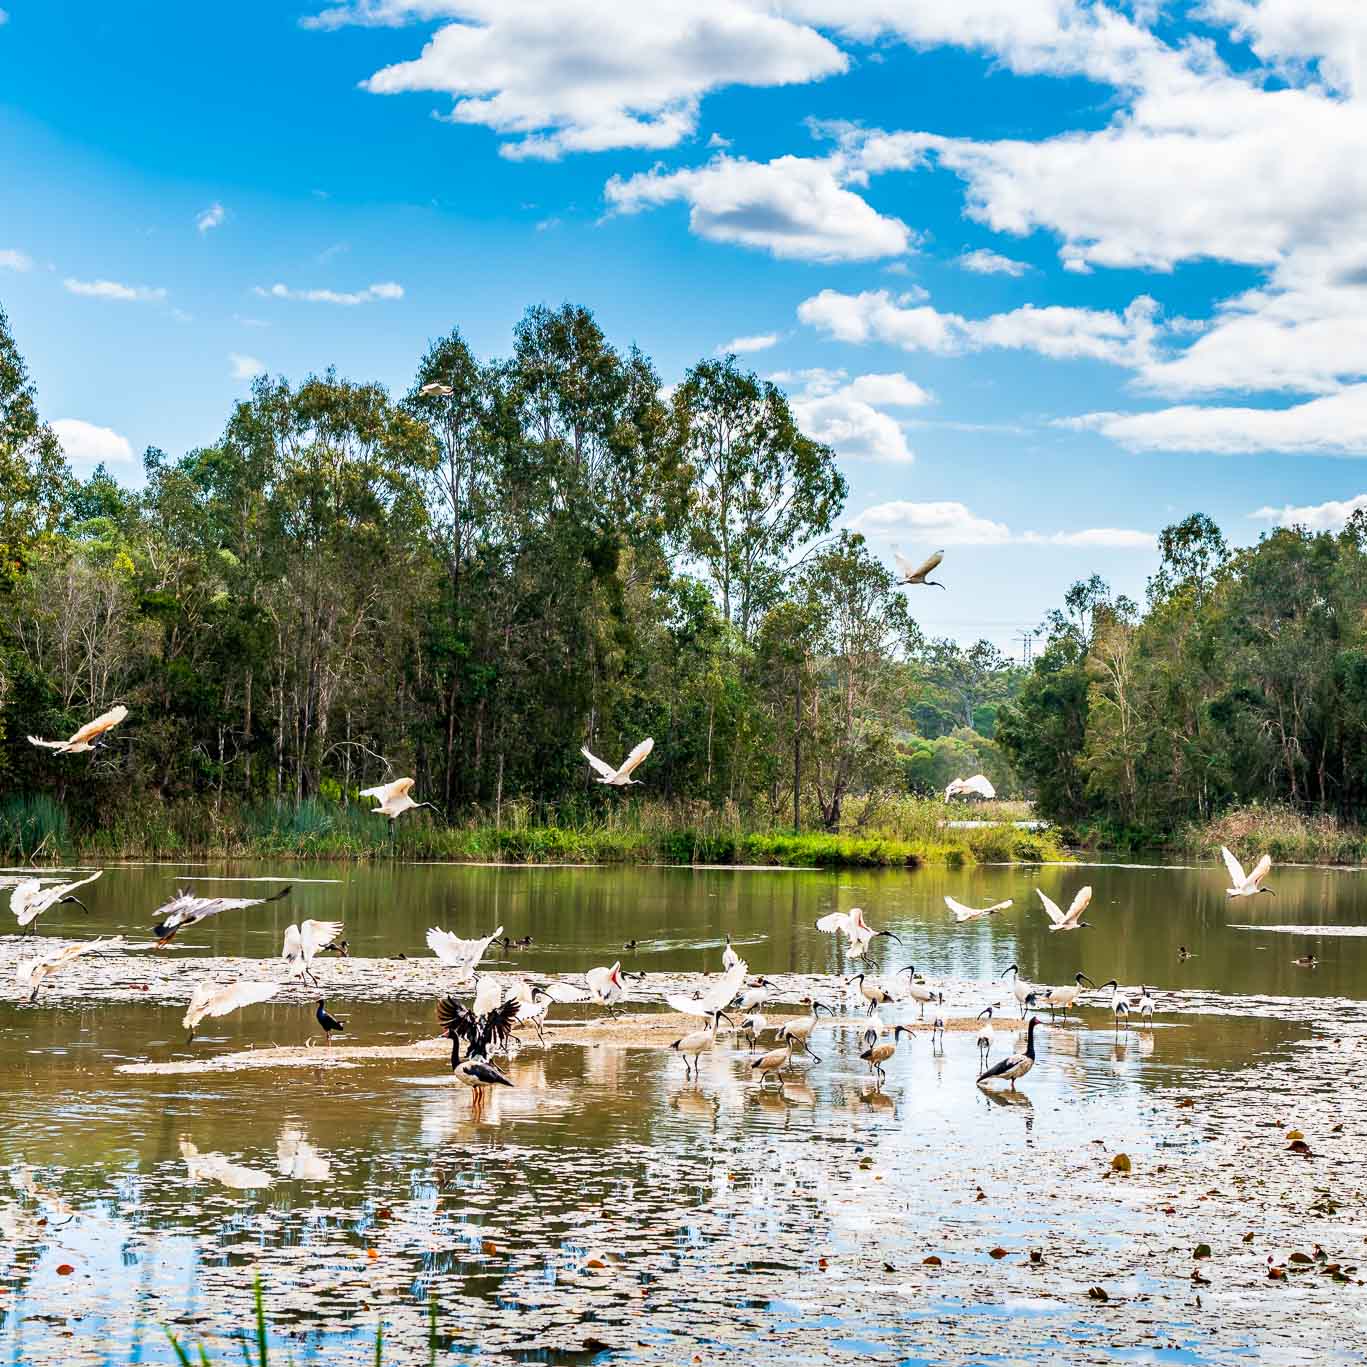 This is a photo of birds at Berrinba Wetlands